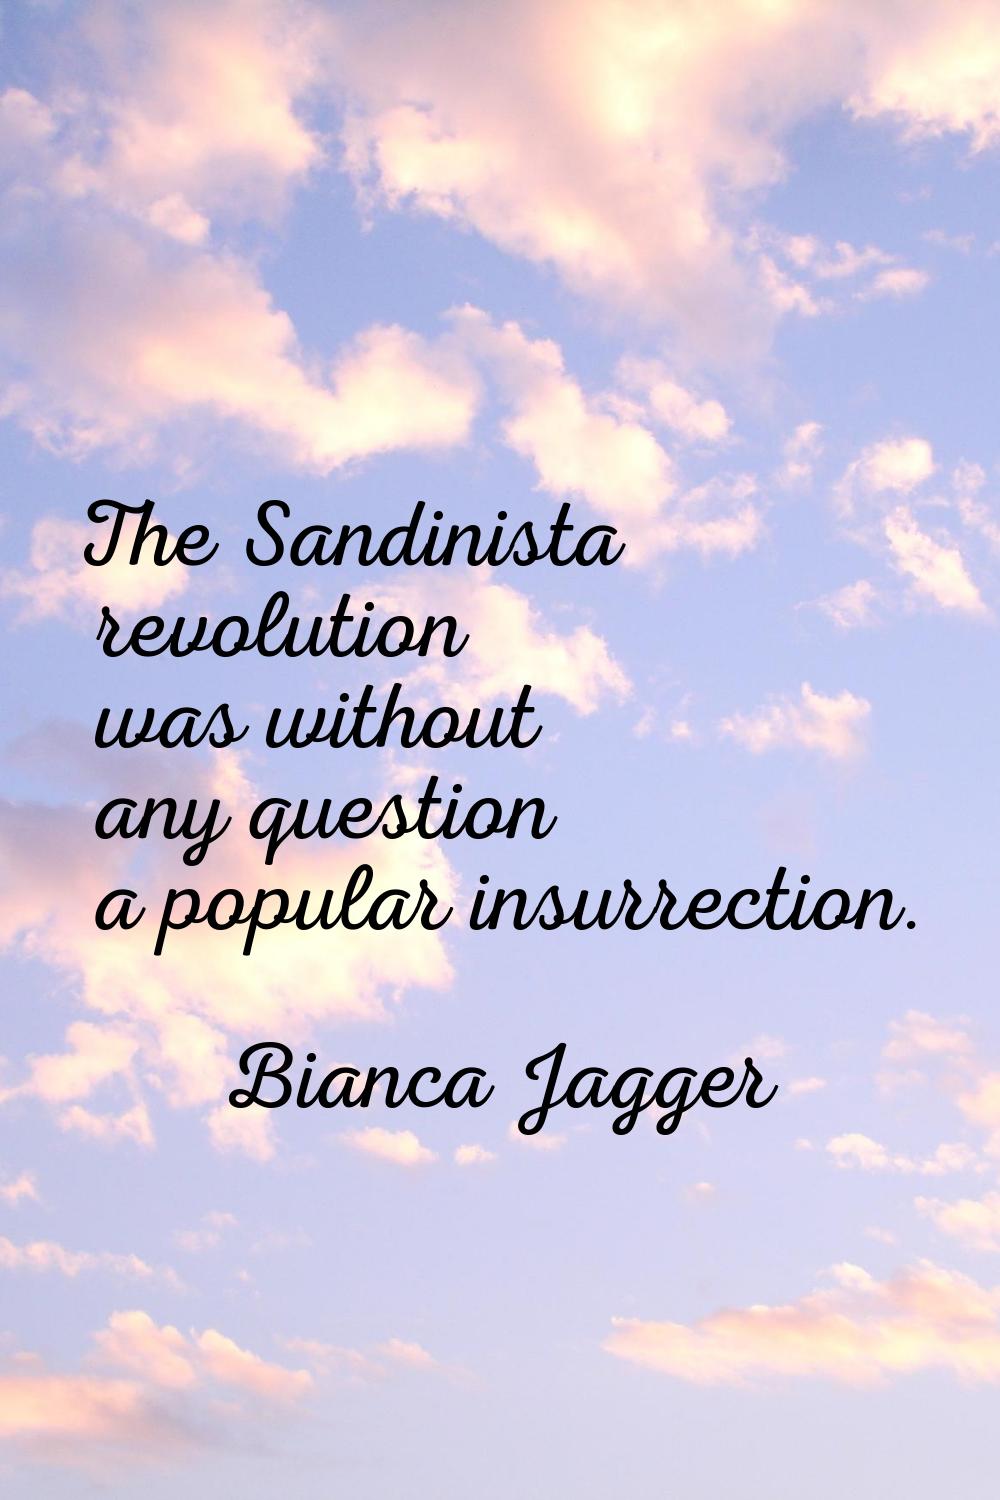 The Sandinista revolution was without any question a popular insurrection.